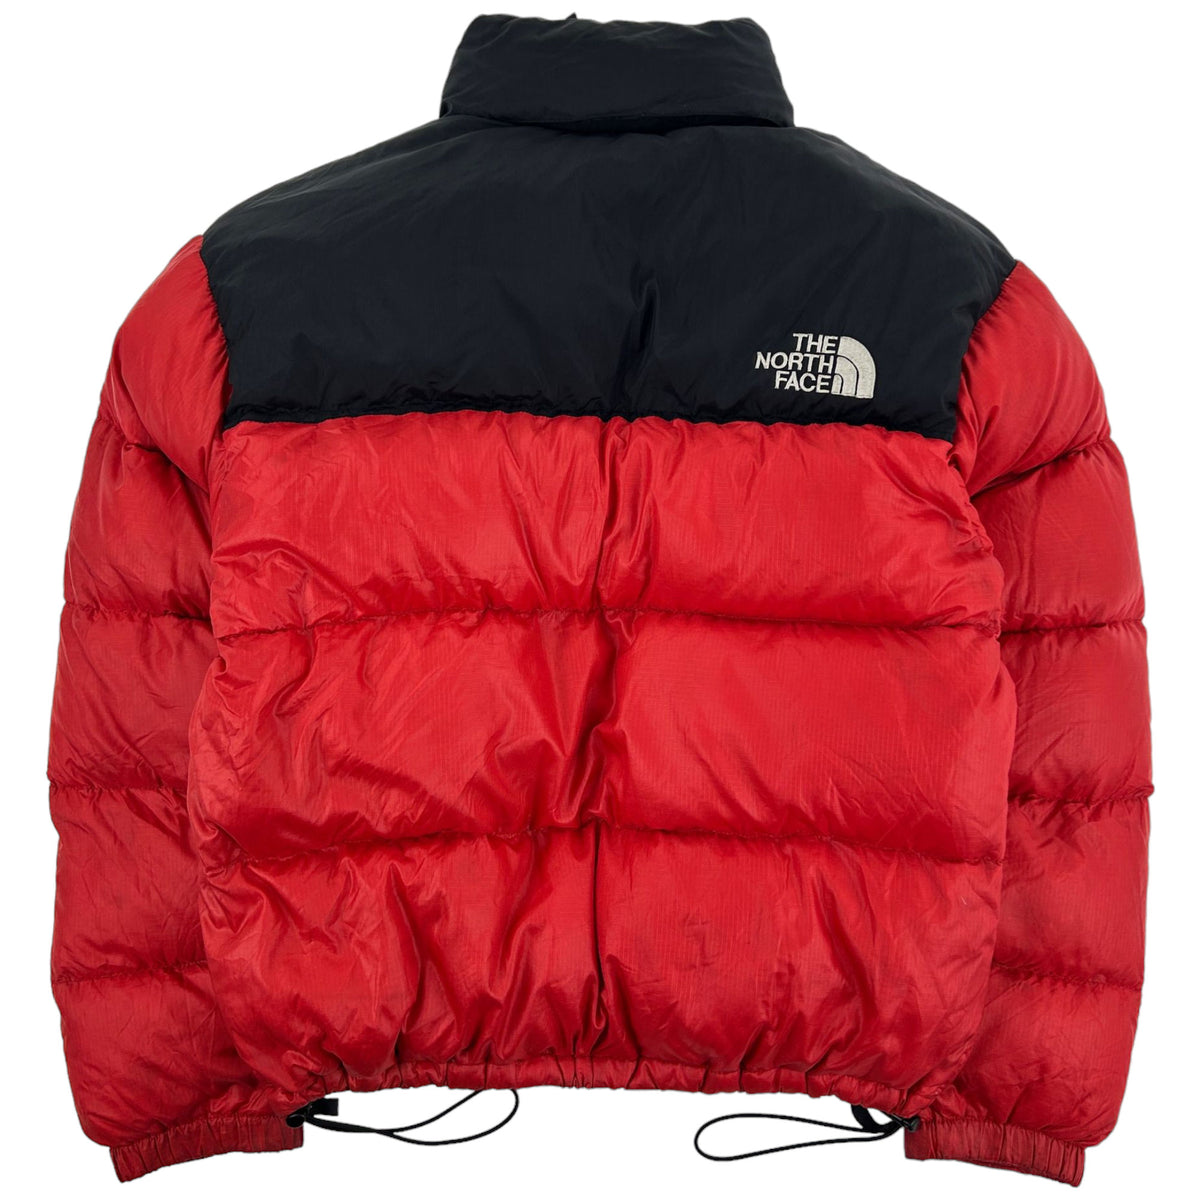 Vintage The North Face Puffer Jacket Size M